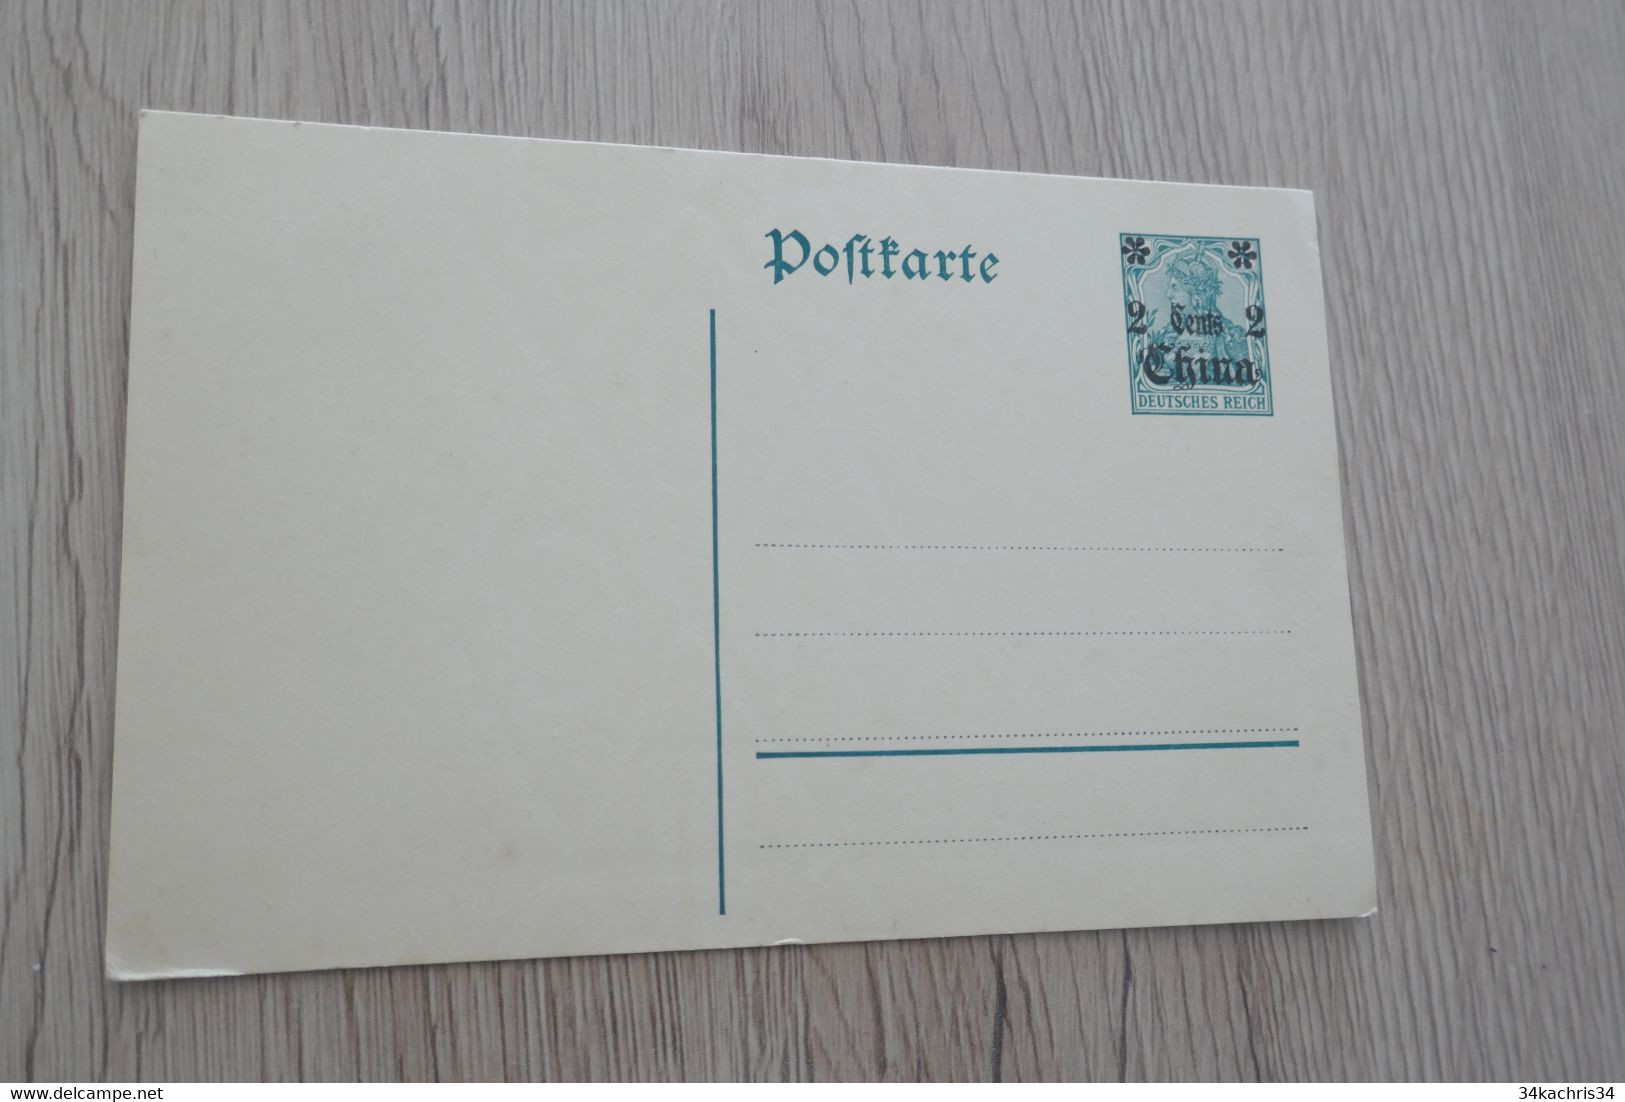 CHINE ENTIER POSTAL ALLEMAGNE SURCHARGE 2 CENTS CHINA - Deutsche Post In China